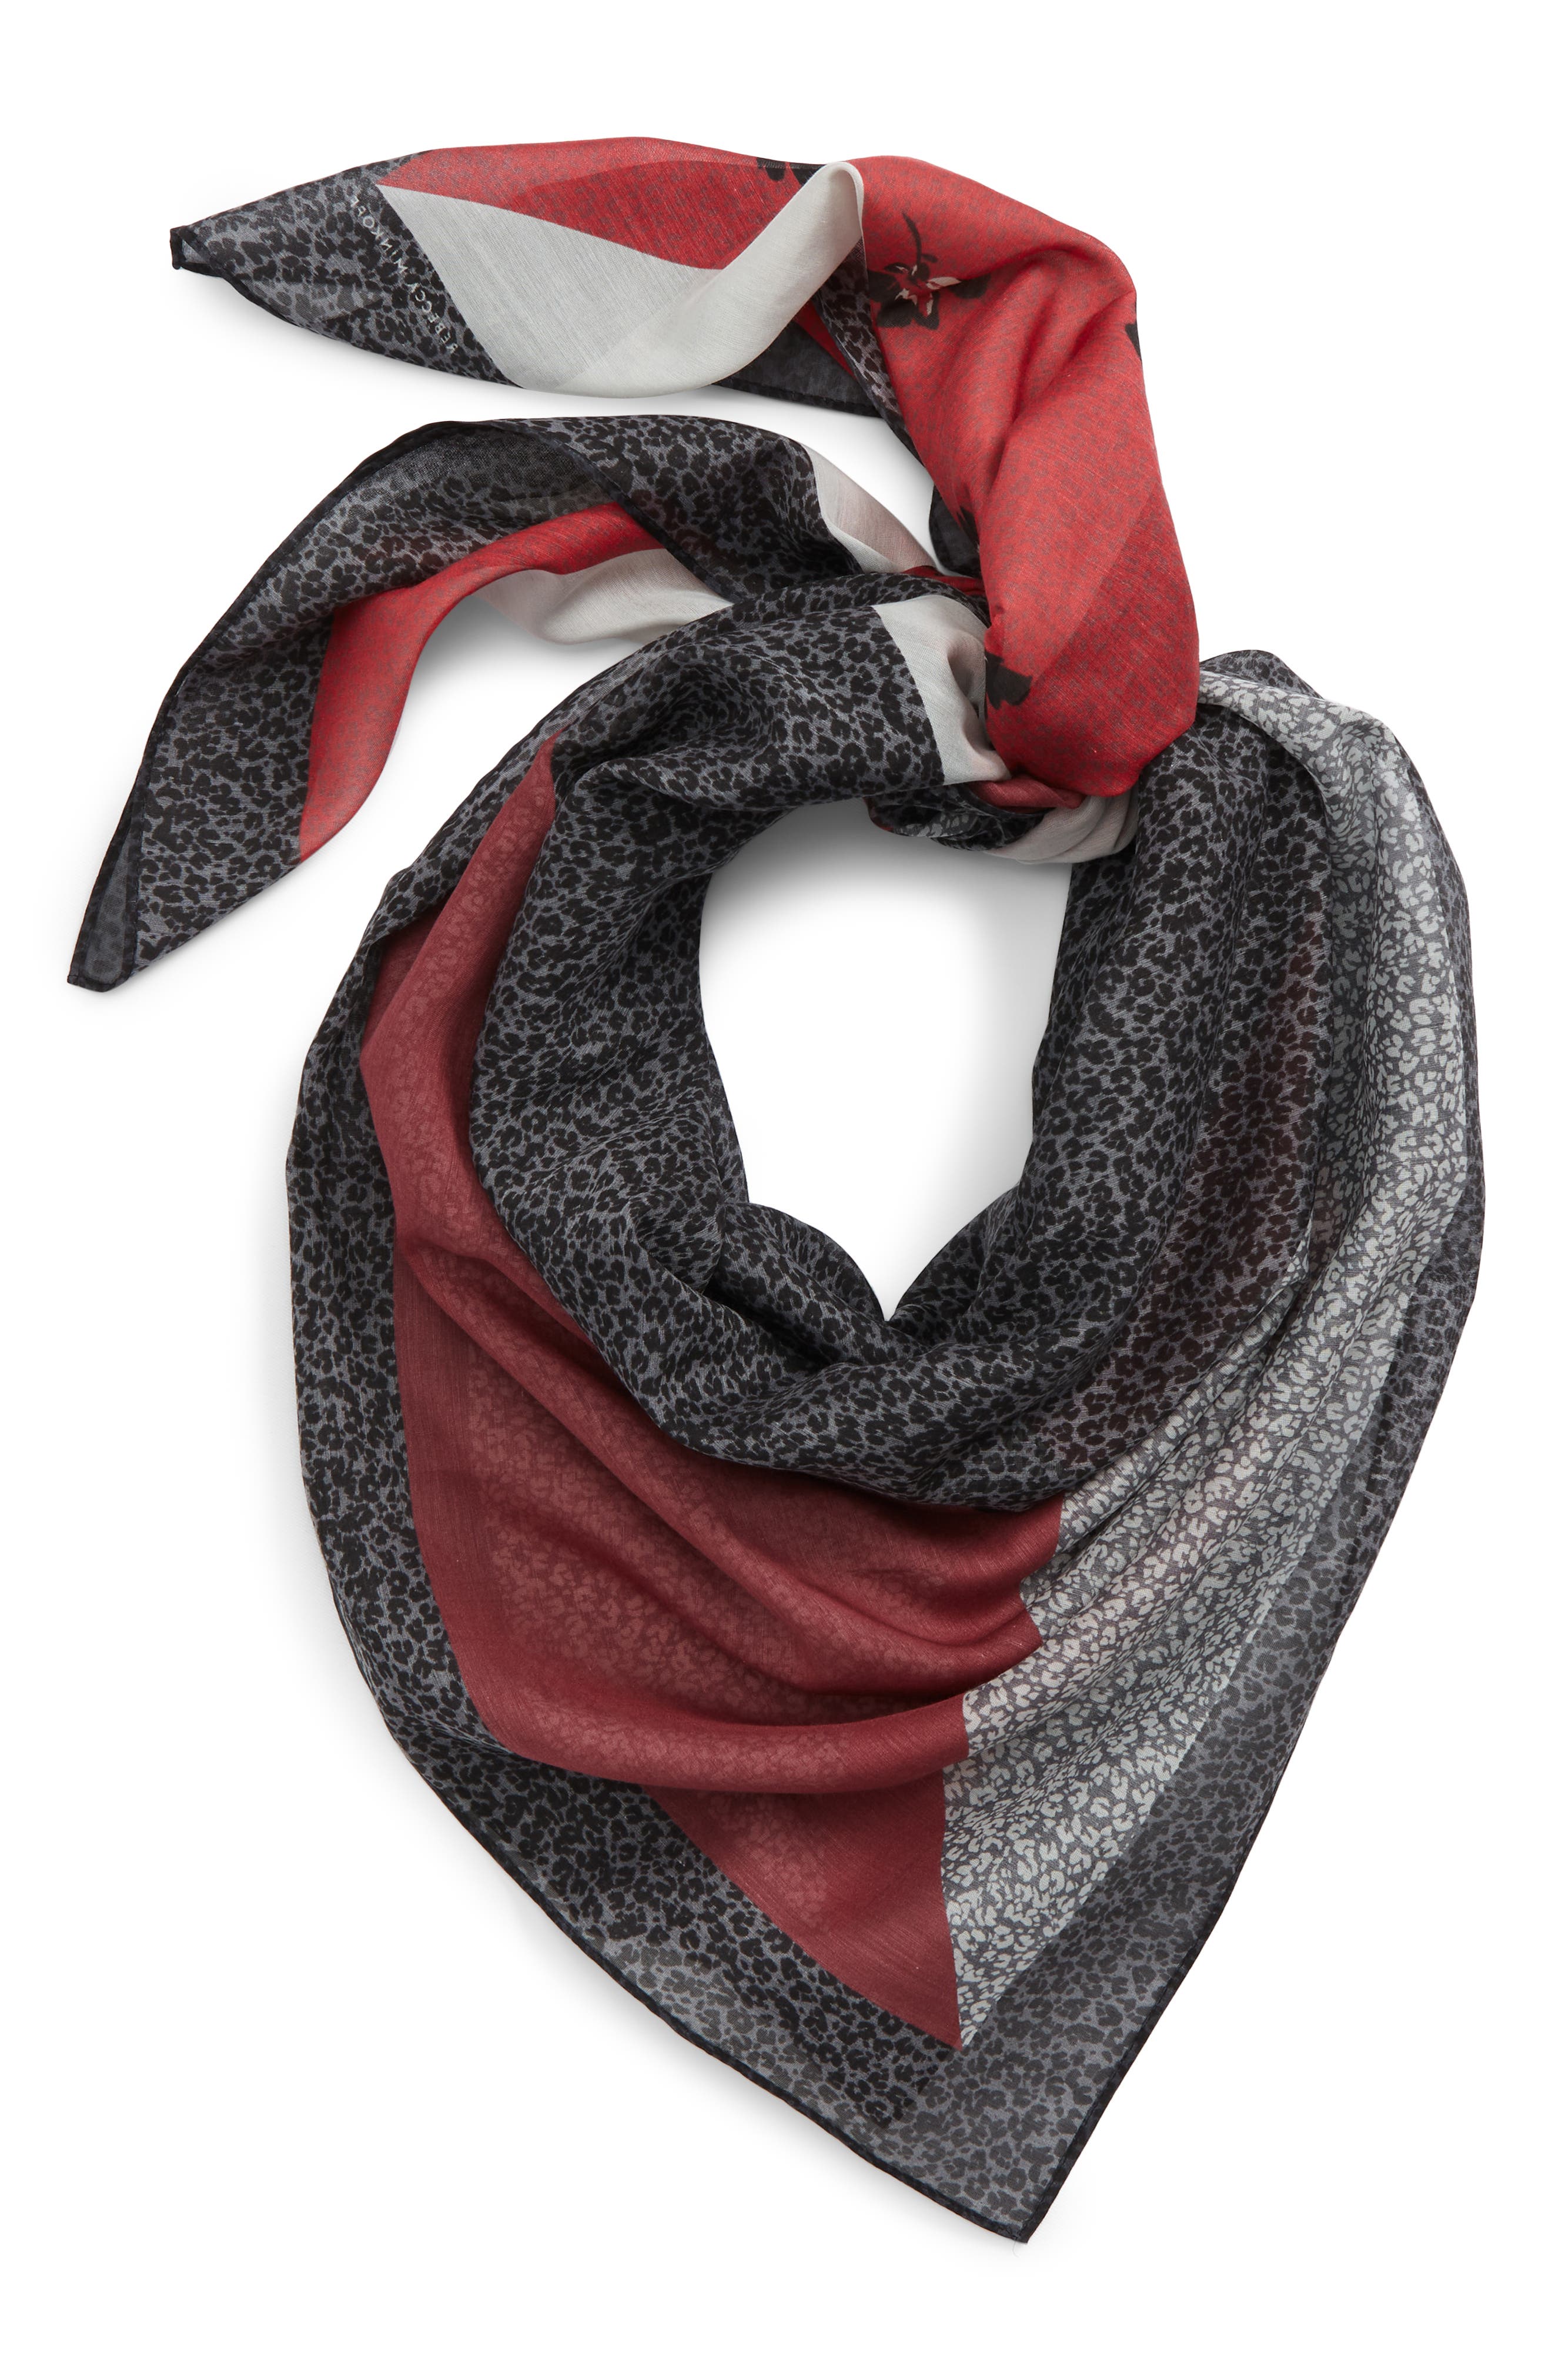 Rebecca Minkoff Cheetah Floral Cotton & Silk Square Scarf in Charcoal/Red at Nordstrom